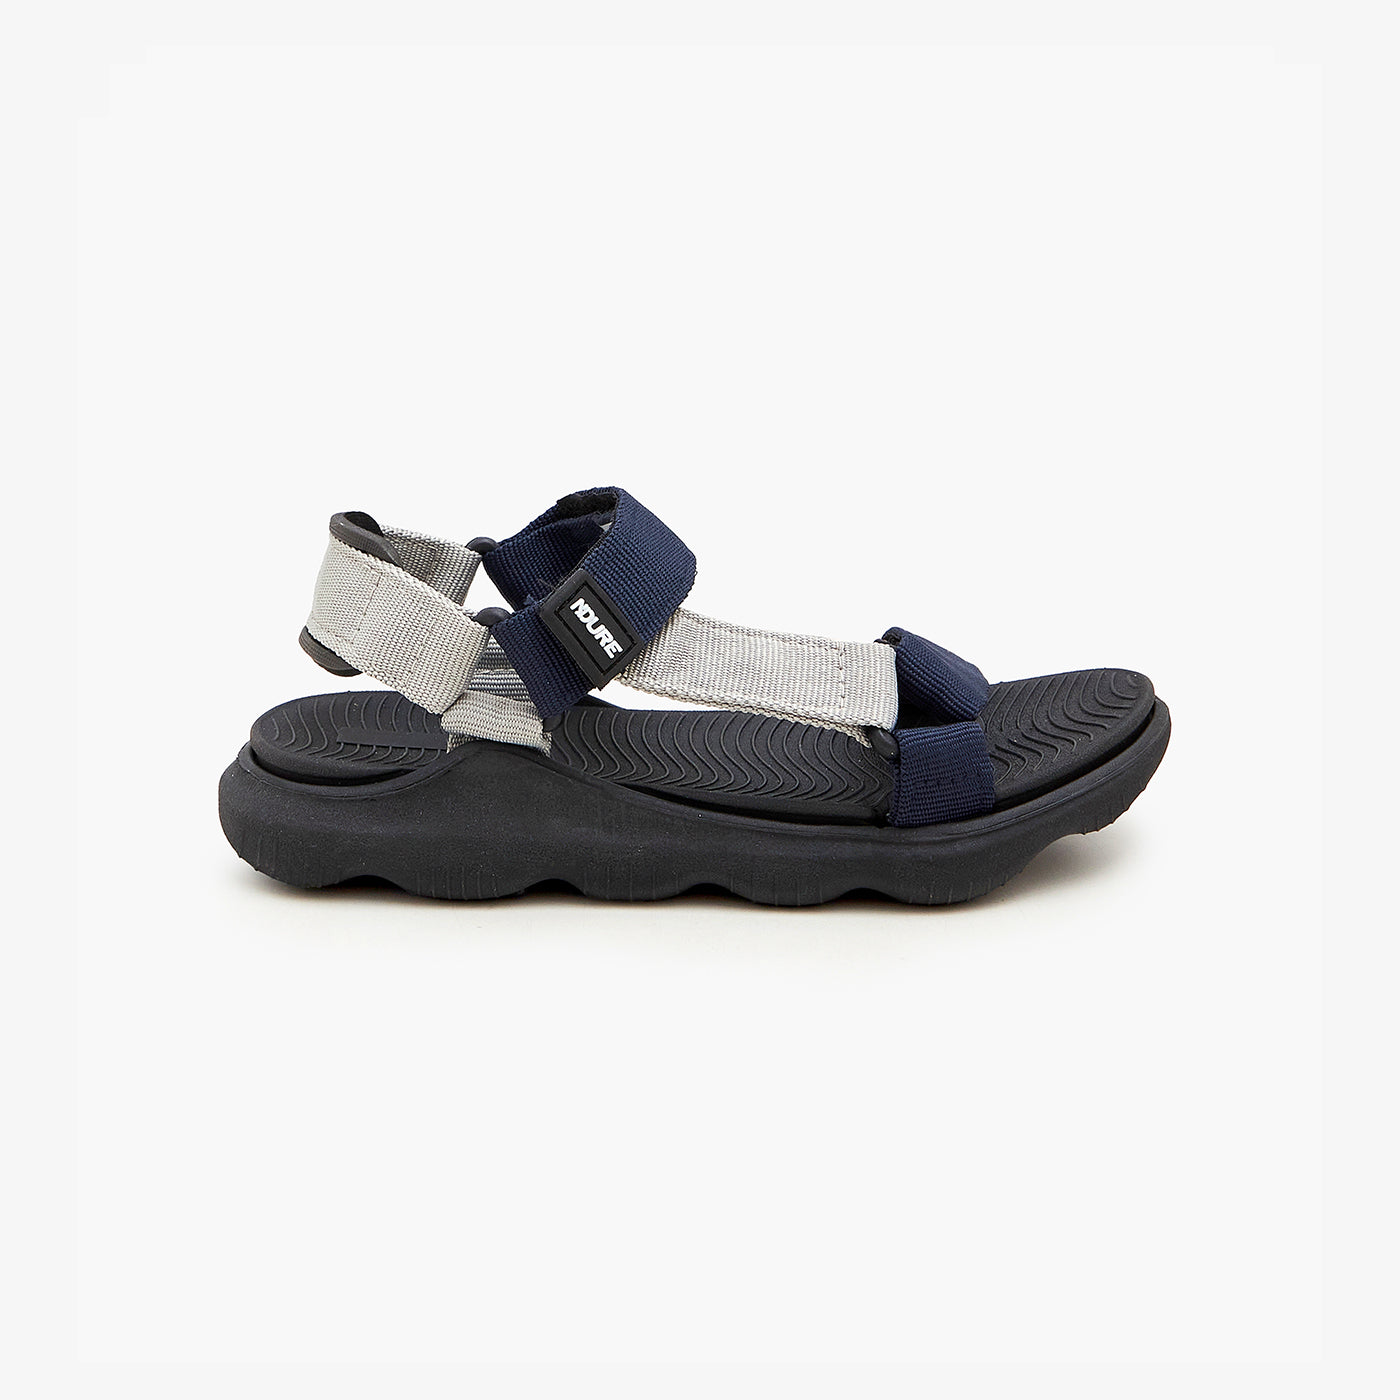 Buy Sandals For Kids: Sl-524-L-Gry-D-Gry | Campus Shoes